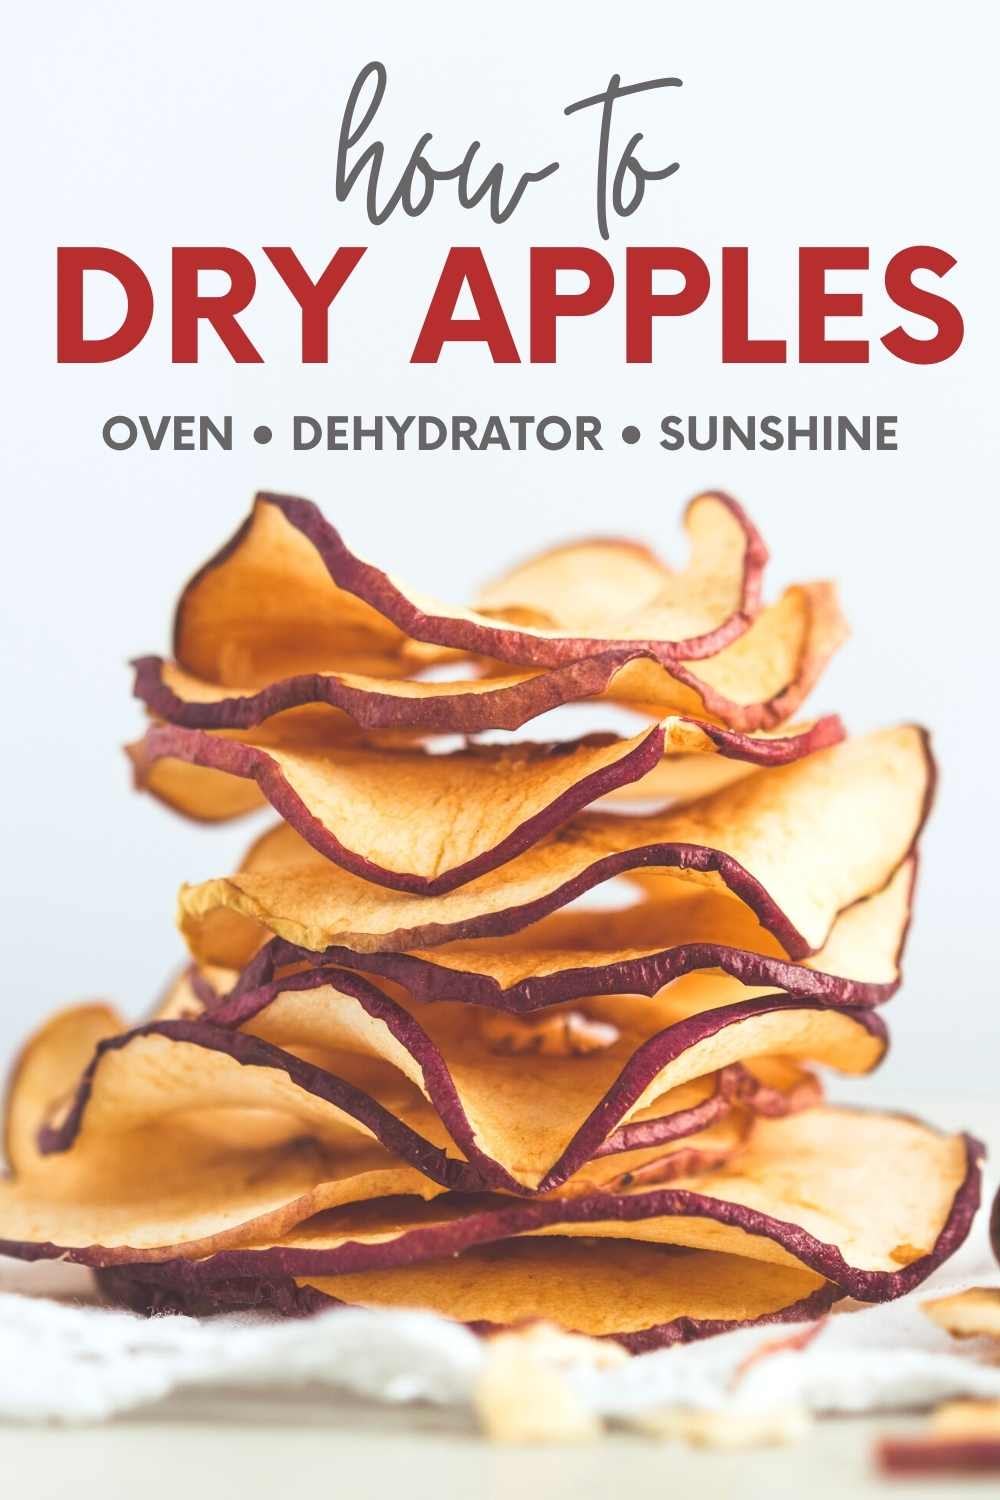 A stack of dried apple slices on a white background. A text overlay reads, "How to Dry Apples. Oven, Dehydrator, Sunshine."